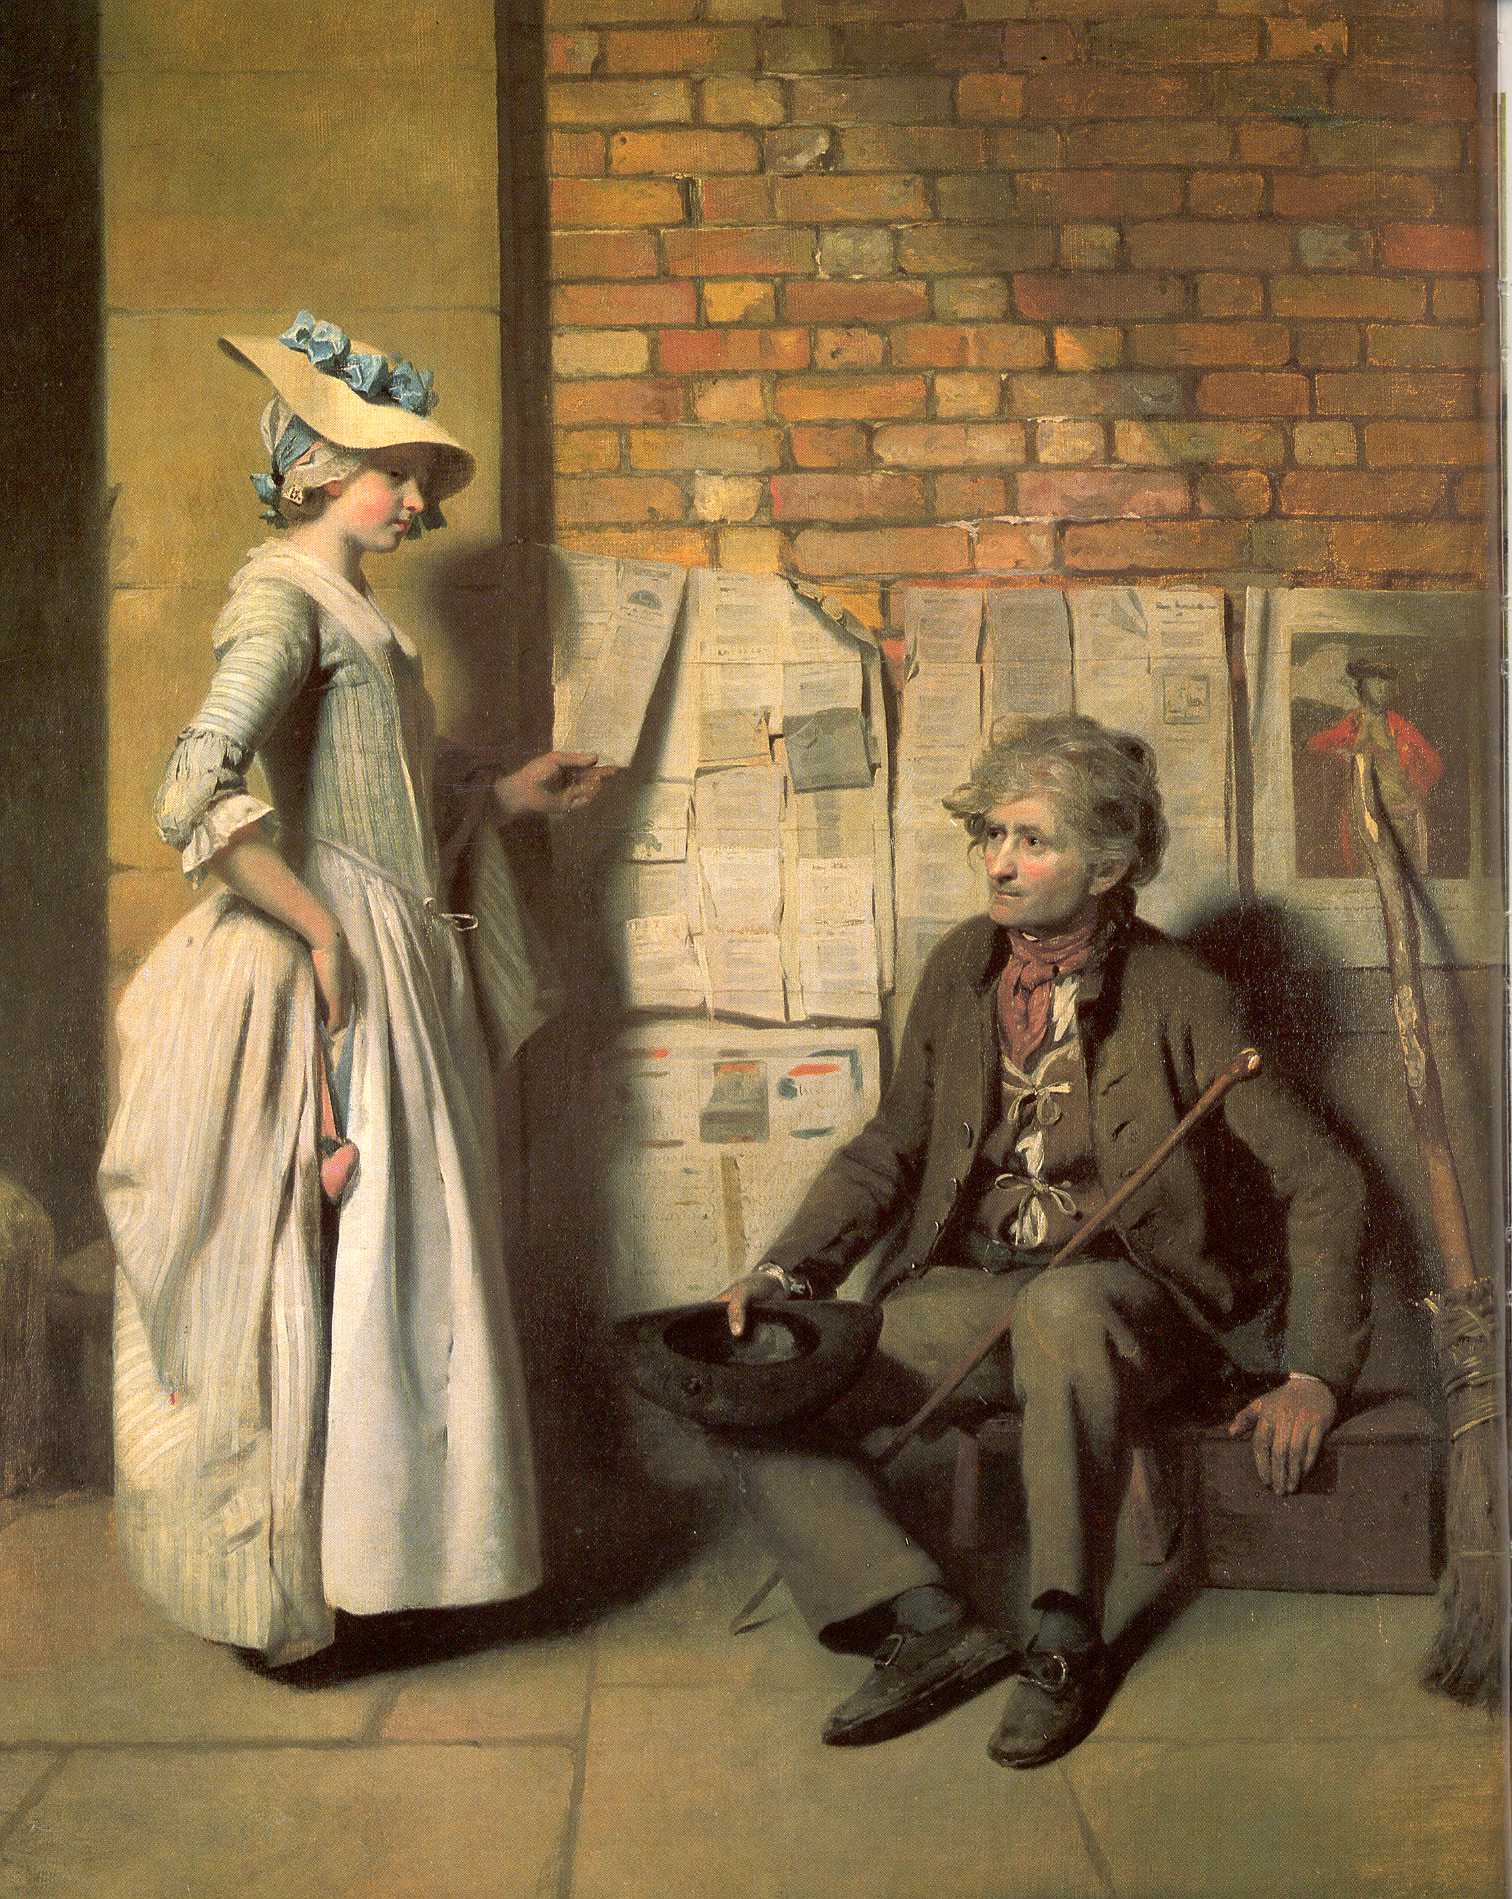 A young well dressed girl stands in front of a brick wall, on which ballads and news sheets are posted.  An older man, hat in hand, is seated on a box.  There is a broom by his side